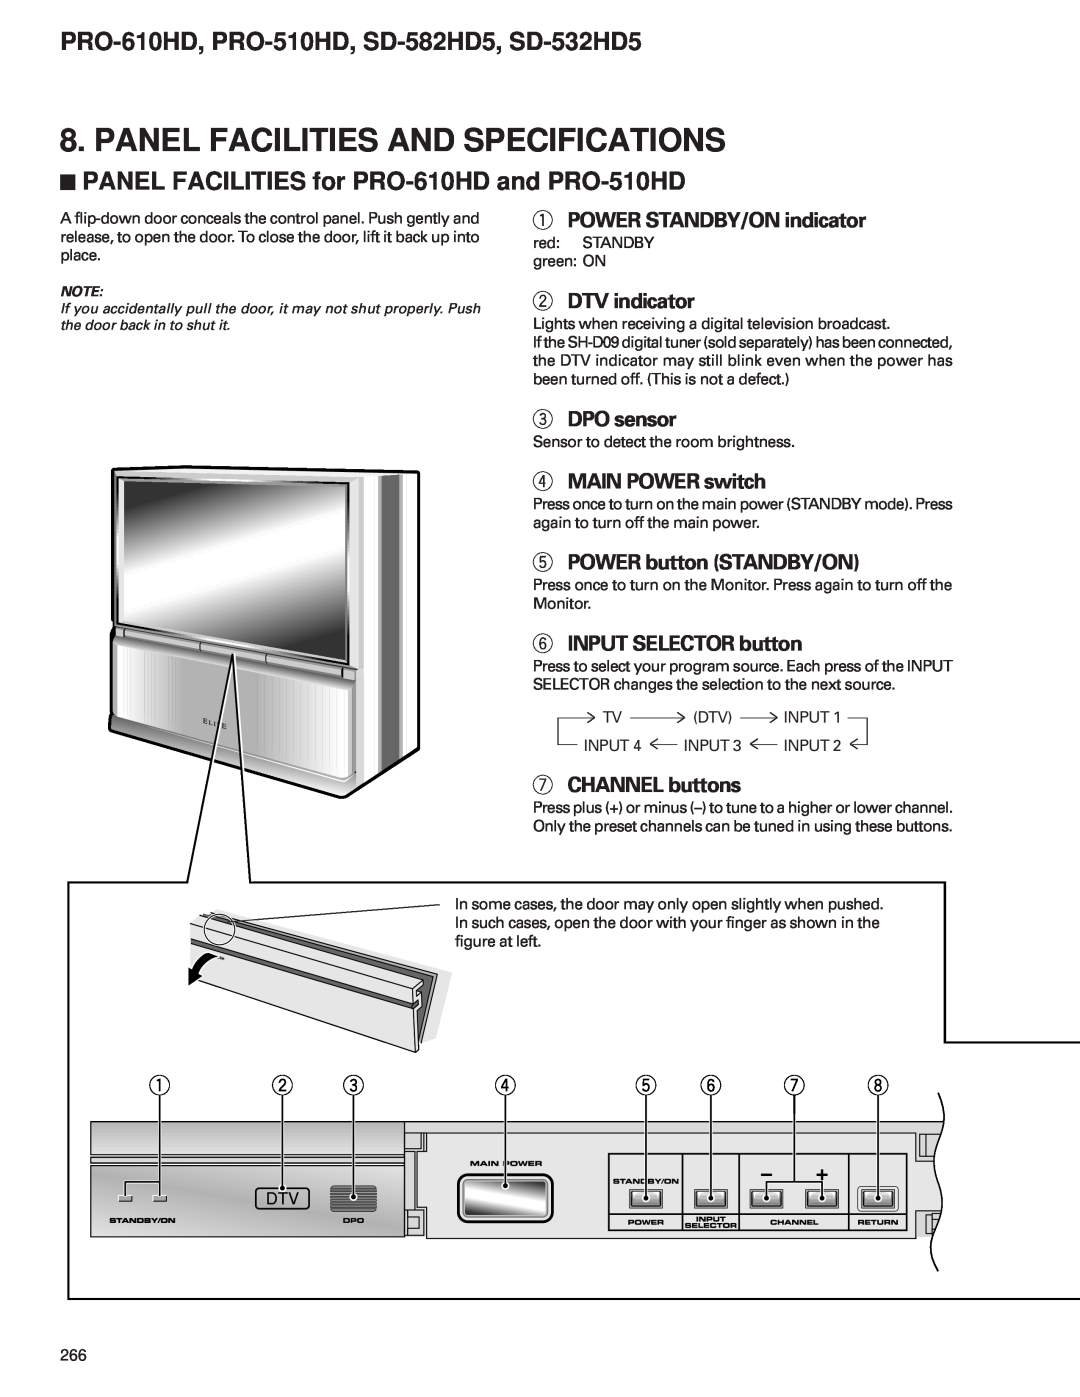 Pioneer Panel Facilities And Specifications, PANEL FACILITIES for PRO-610HD and PRO-510HD, POWER STANDBY/ON indicator 